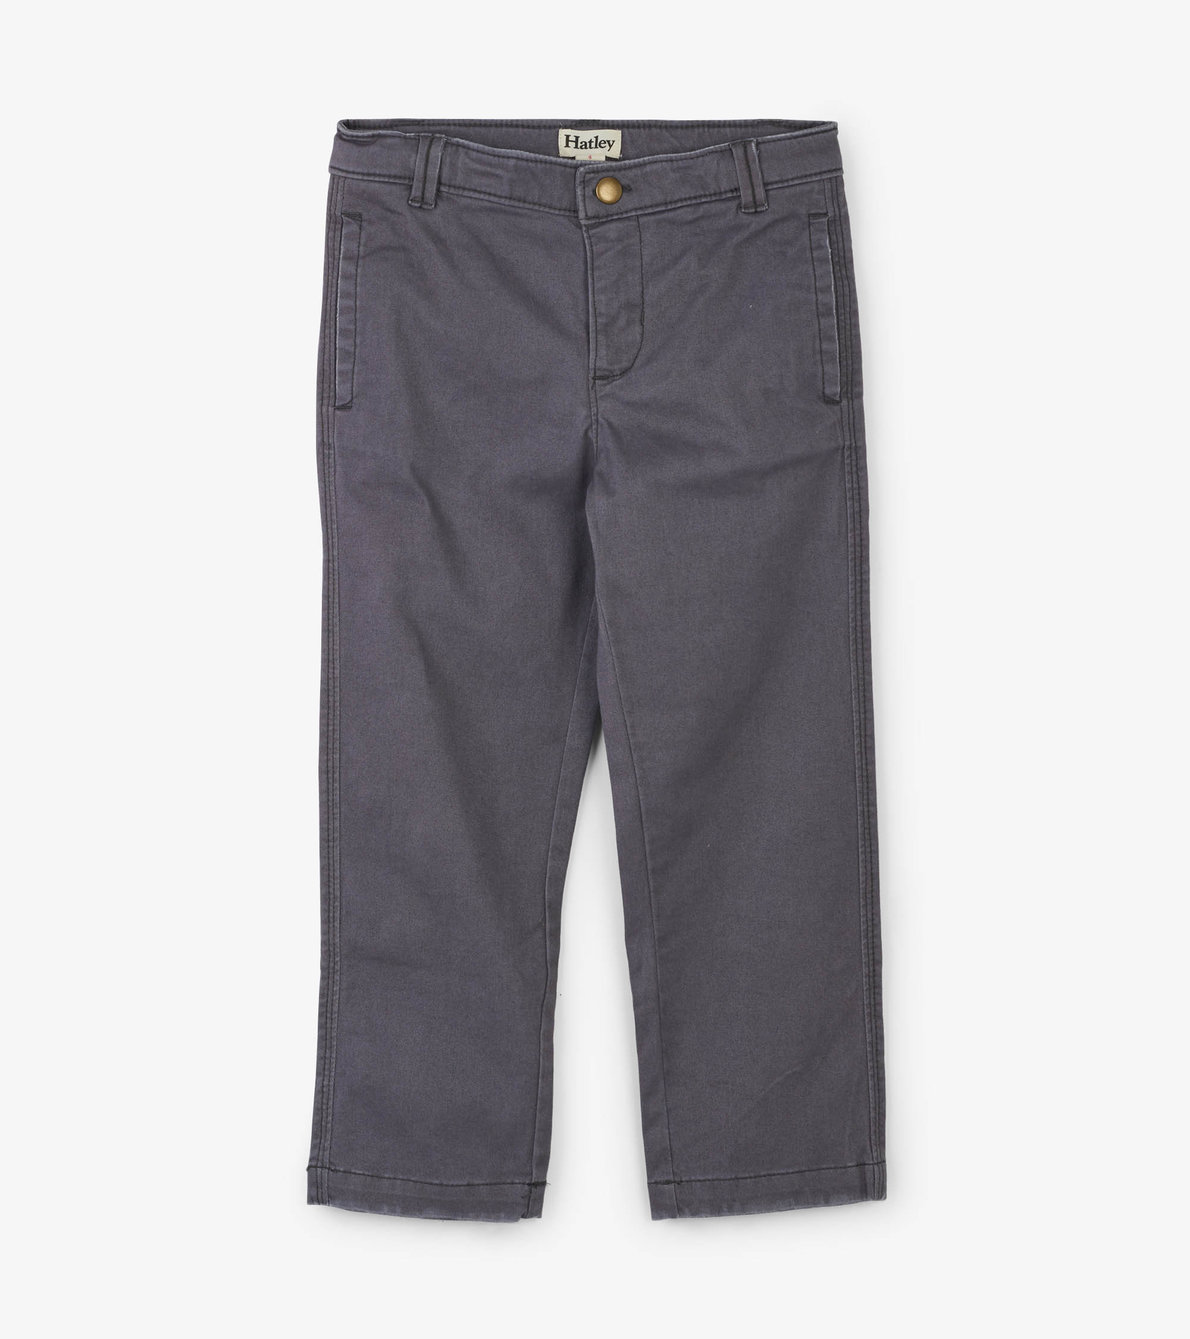 View larger image of Boys Grey Twill Pants